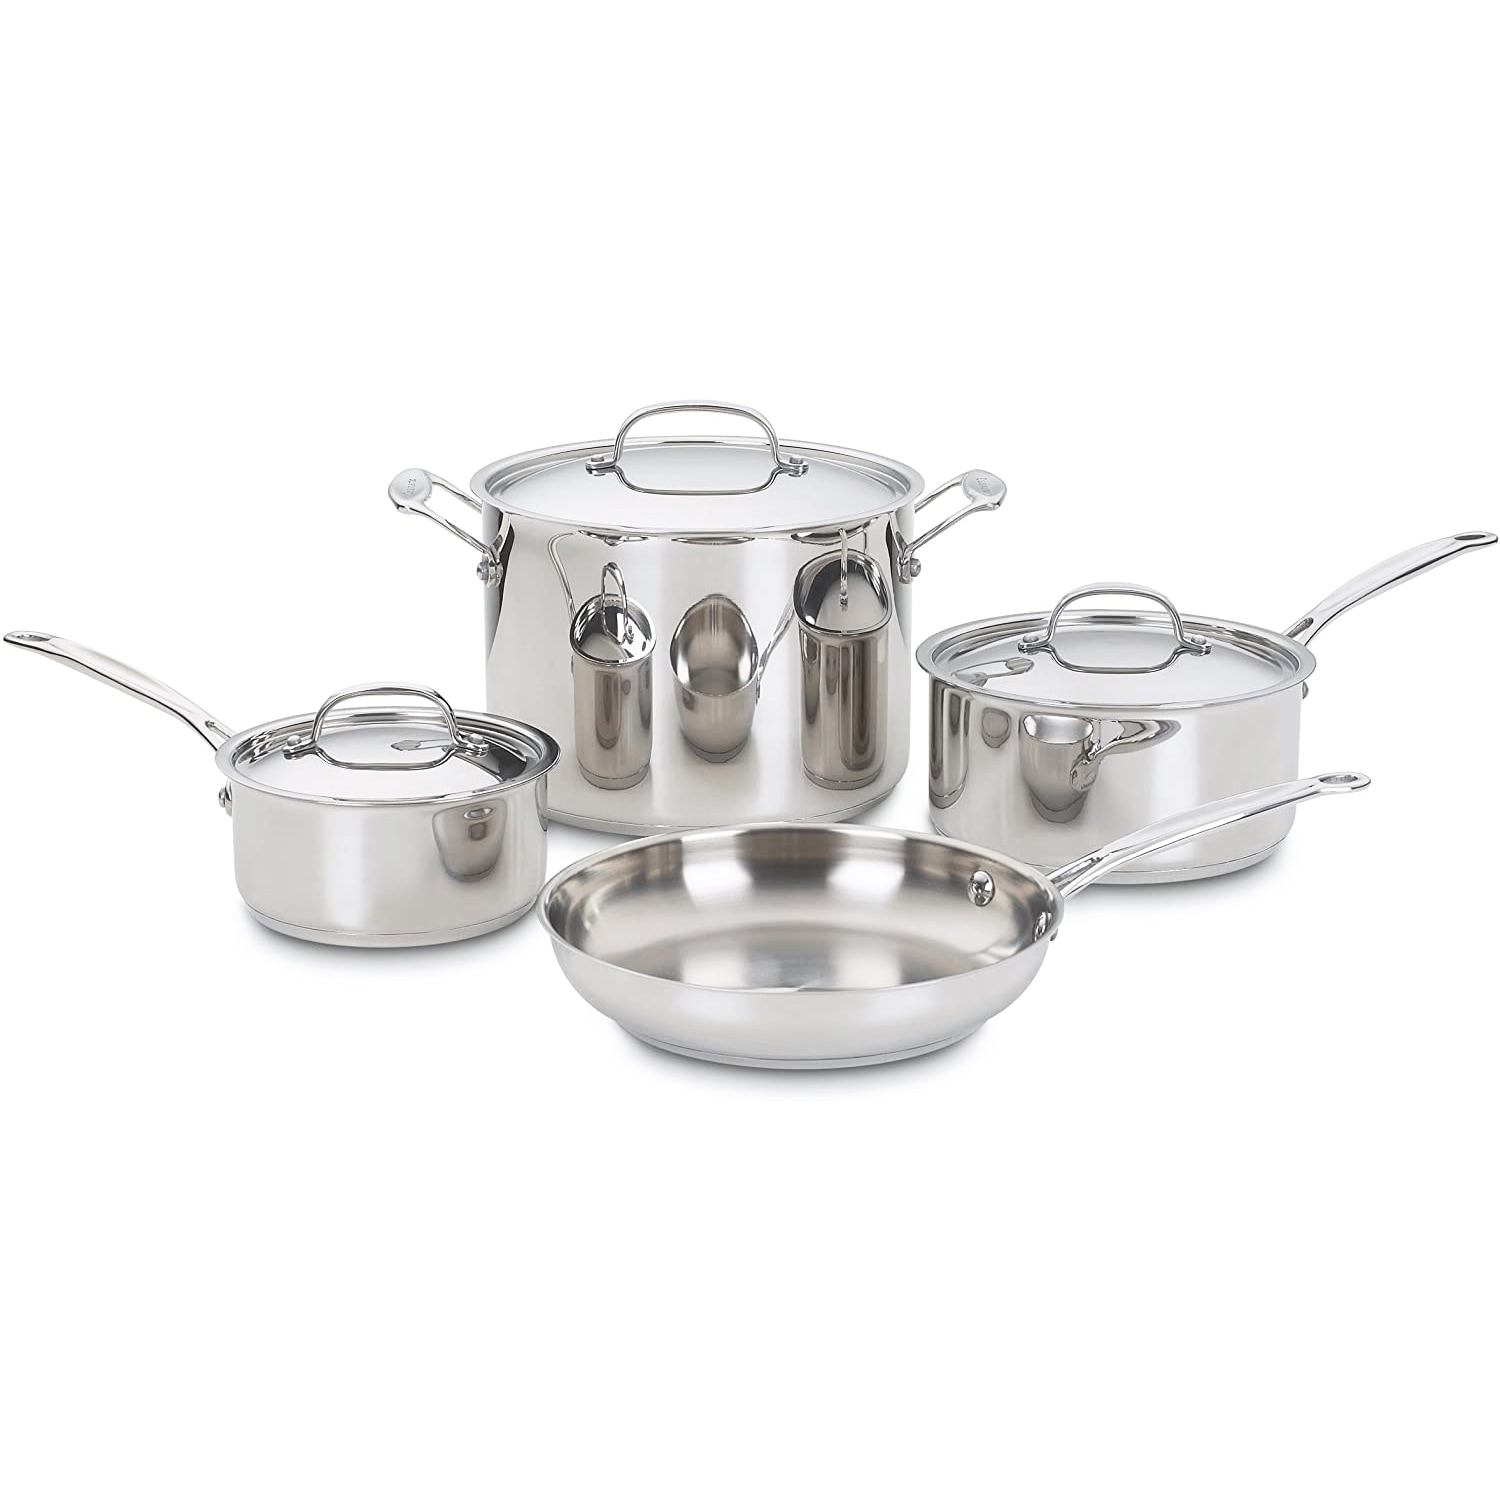 https://ak1.ostkcdn.com/images/products/is/images/direct/80b7b00dd91480f9ae8c1e95355ec55d715804cd/Cuisinart-Chef%27s-Classic-7-Piece-Cookware-Pot-and-Pan-Set%2C-Stainless.jpg